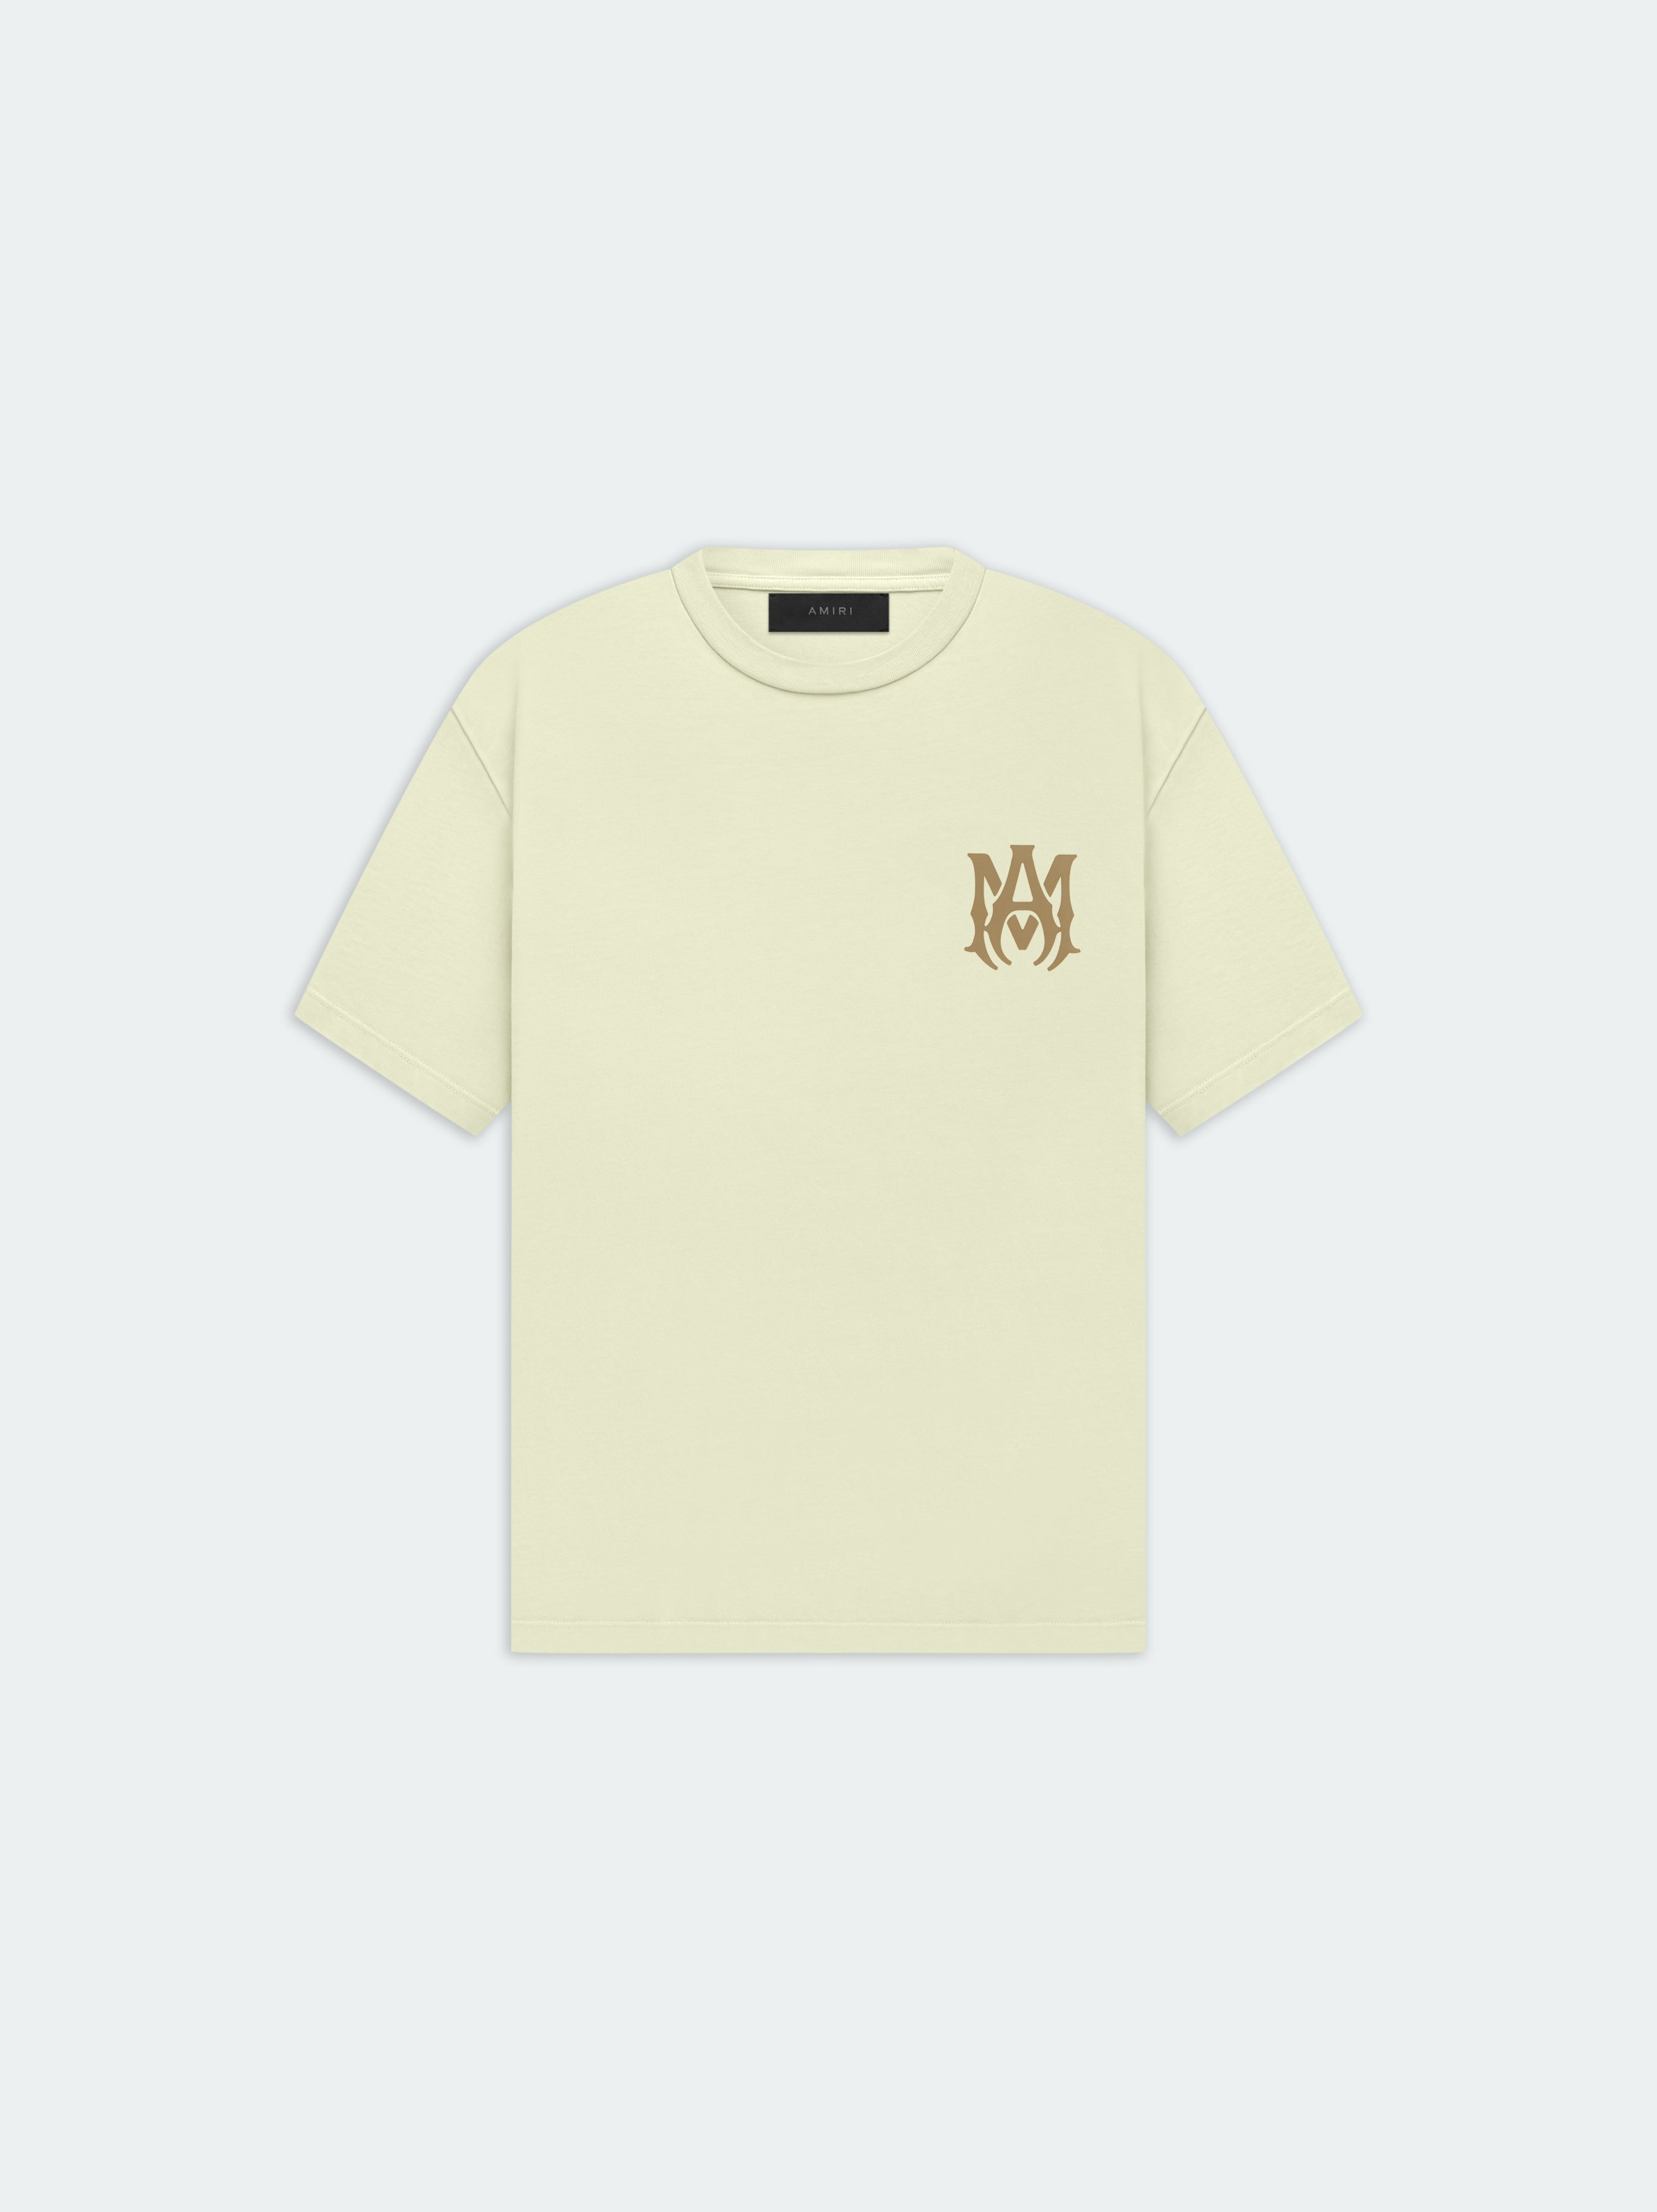 Product MA LOGO TEE - French Vanilla featured image